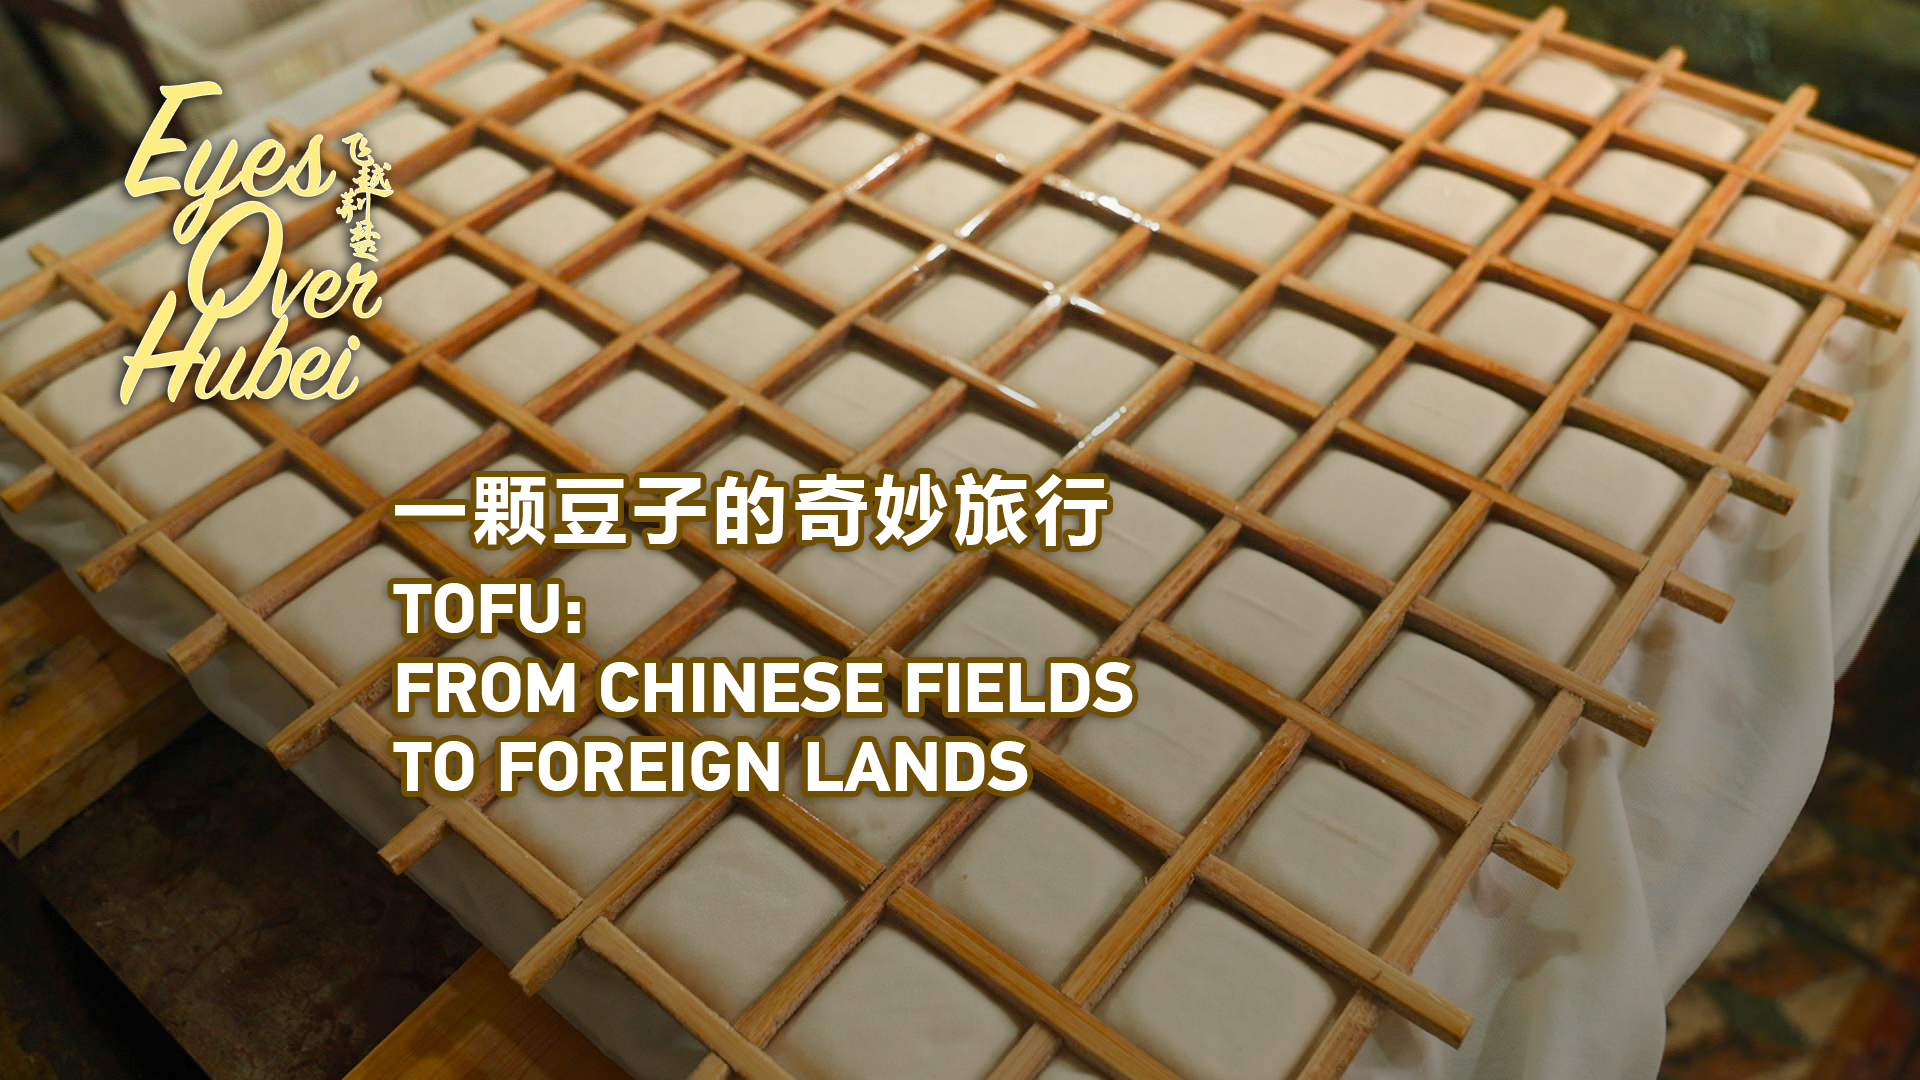 Eyes Over Hubei: Tofu: From Chinese fields to foreign lands